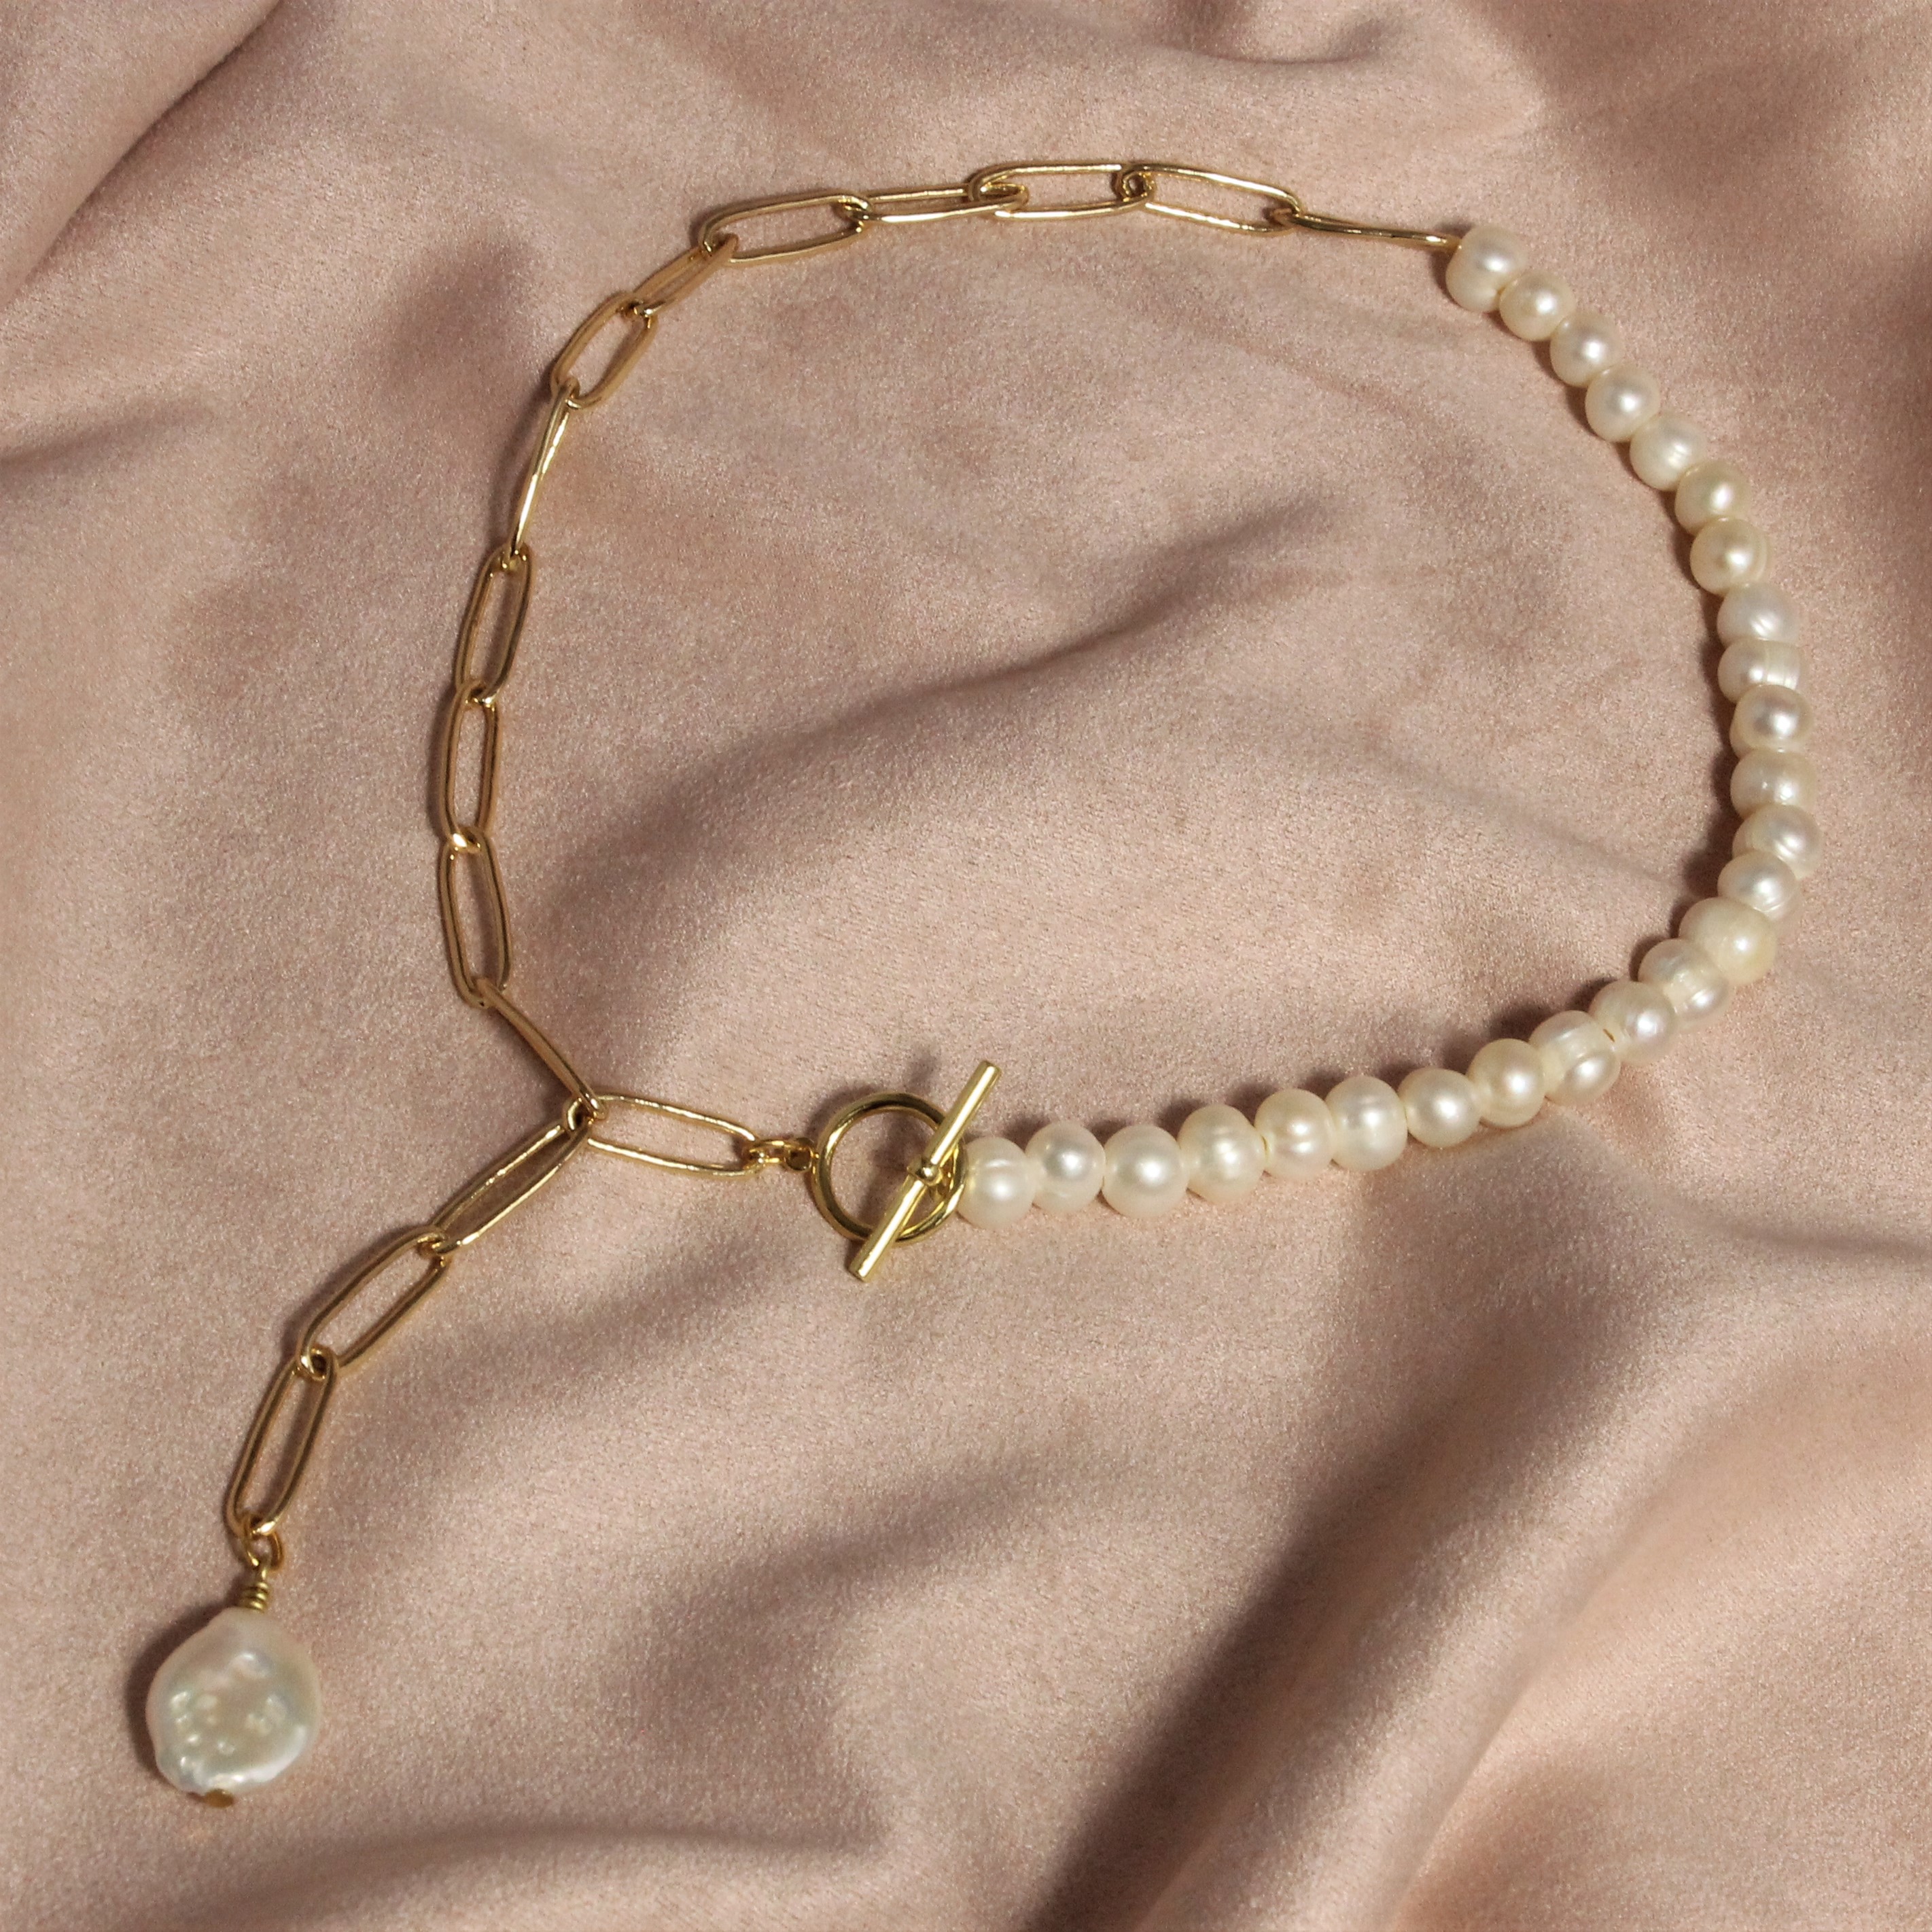 Stainless Steel Half With Chain Half Pearls and Eyes Accessories Brace